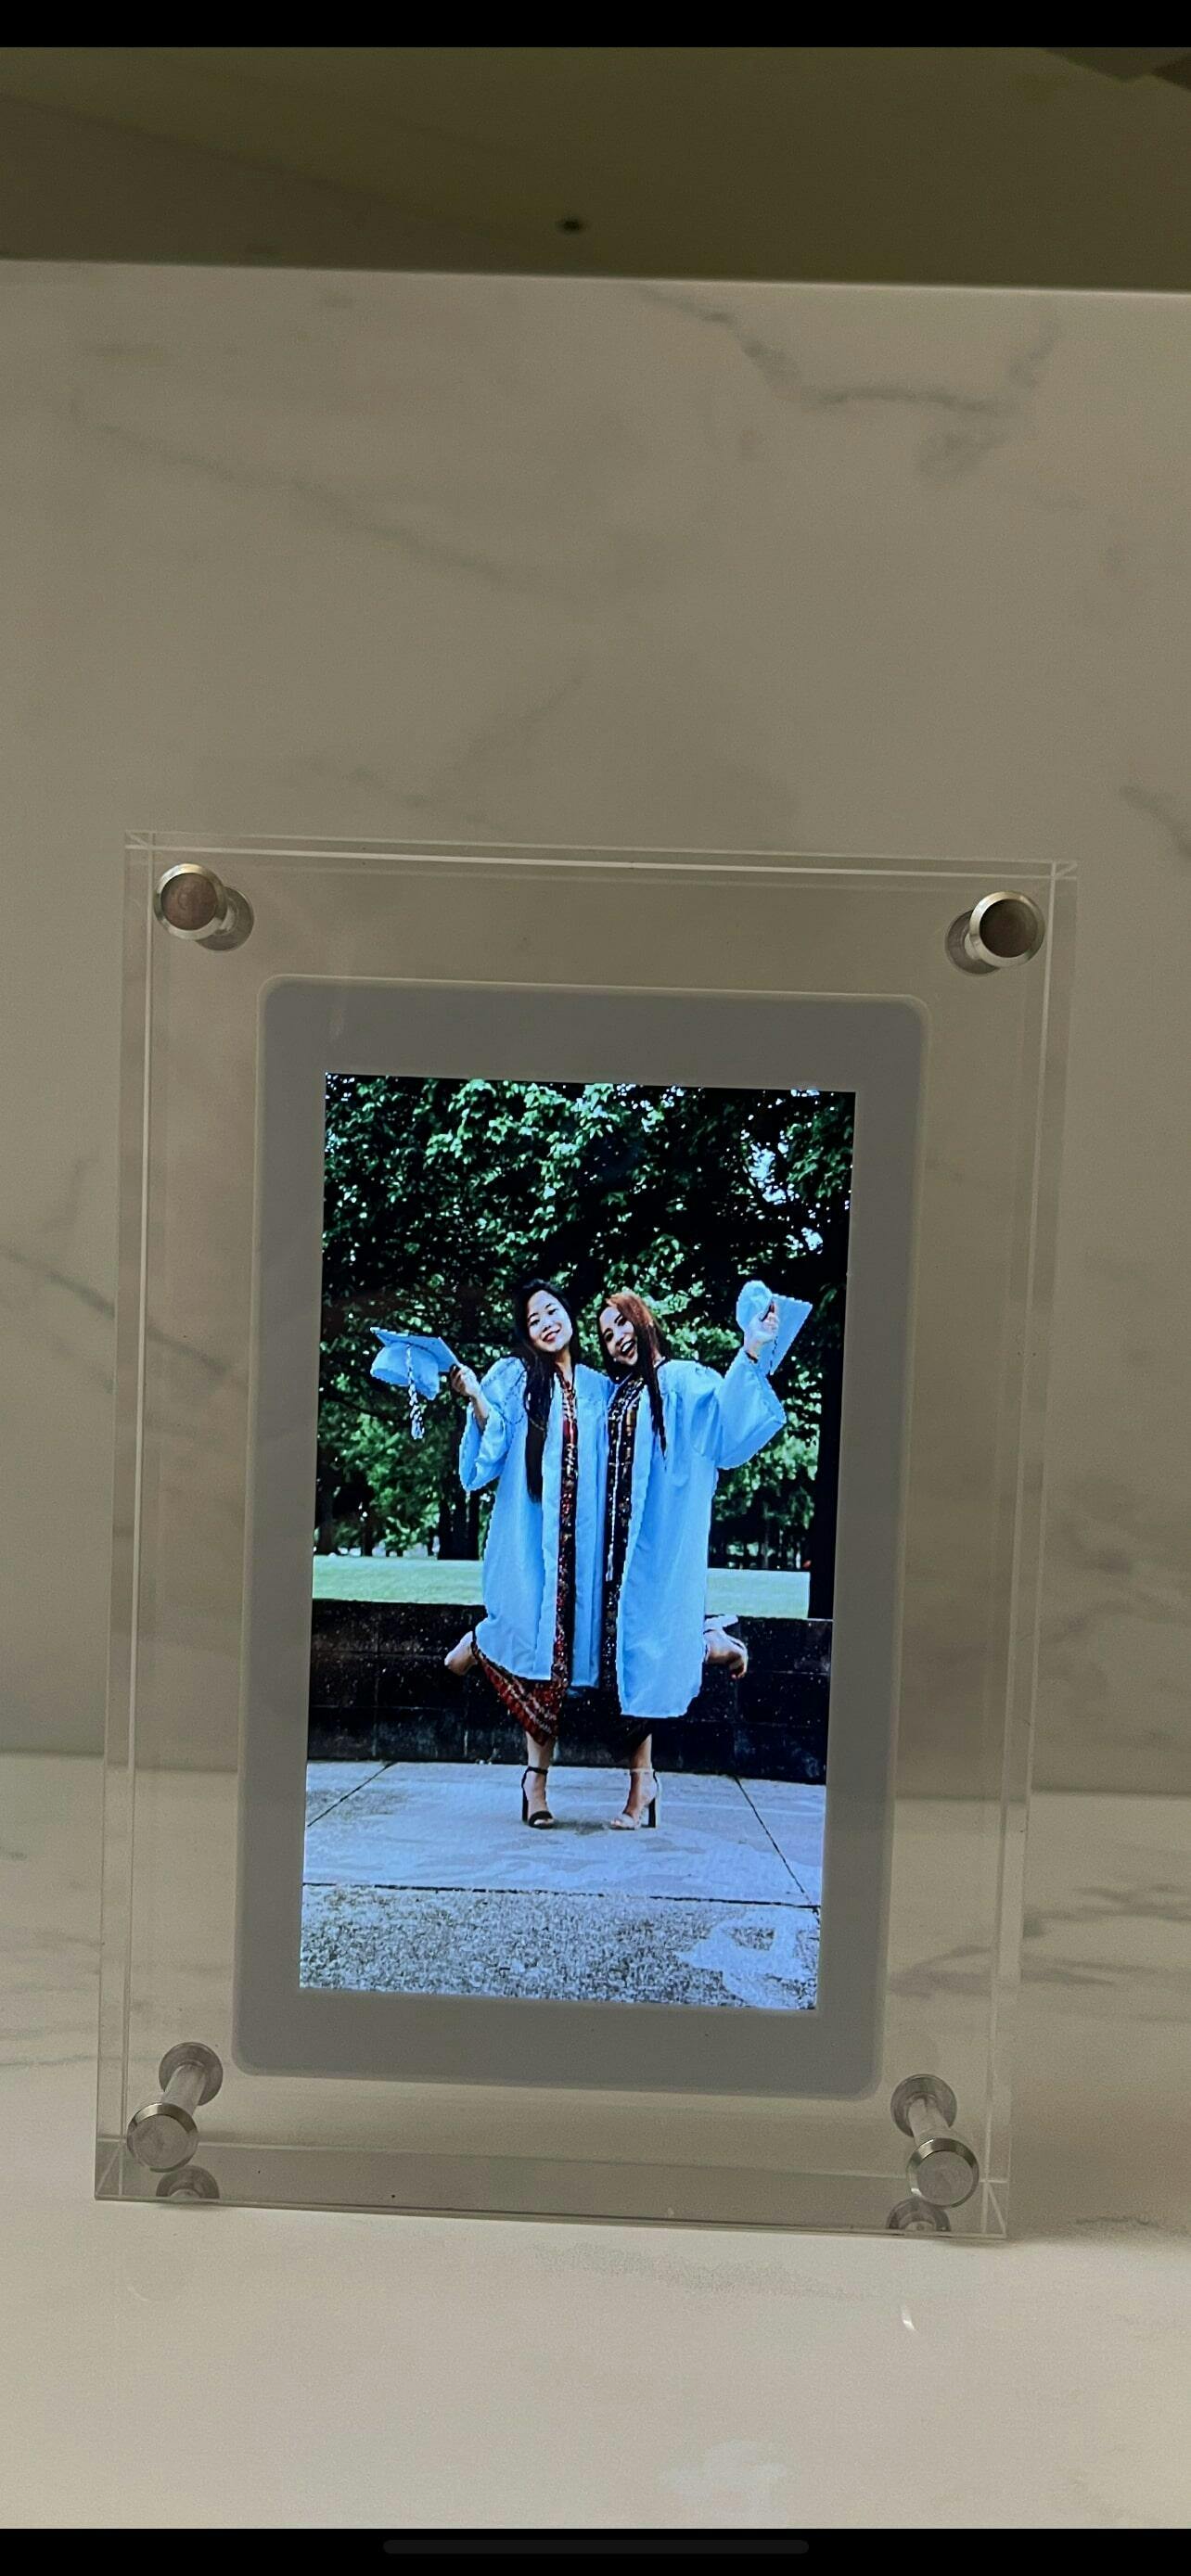 InfinityFrame - Video/Picture Frame